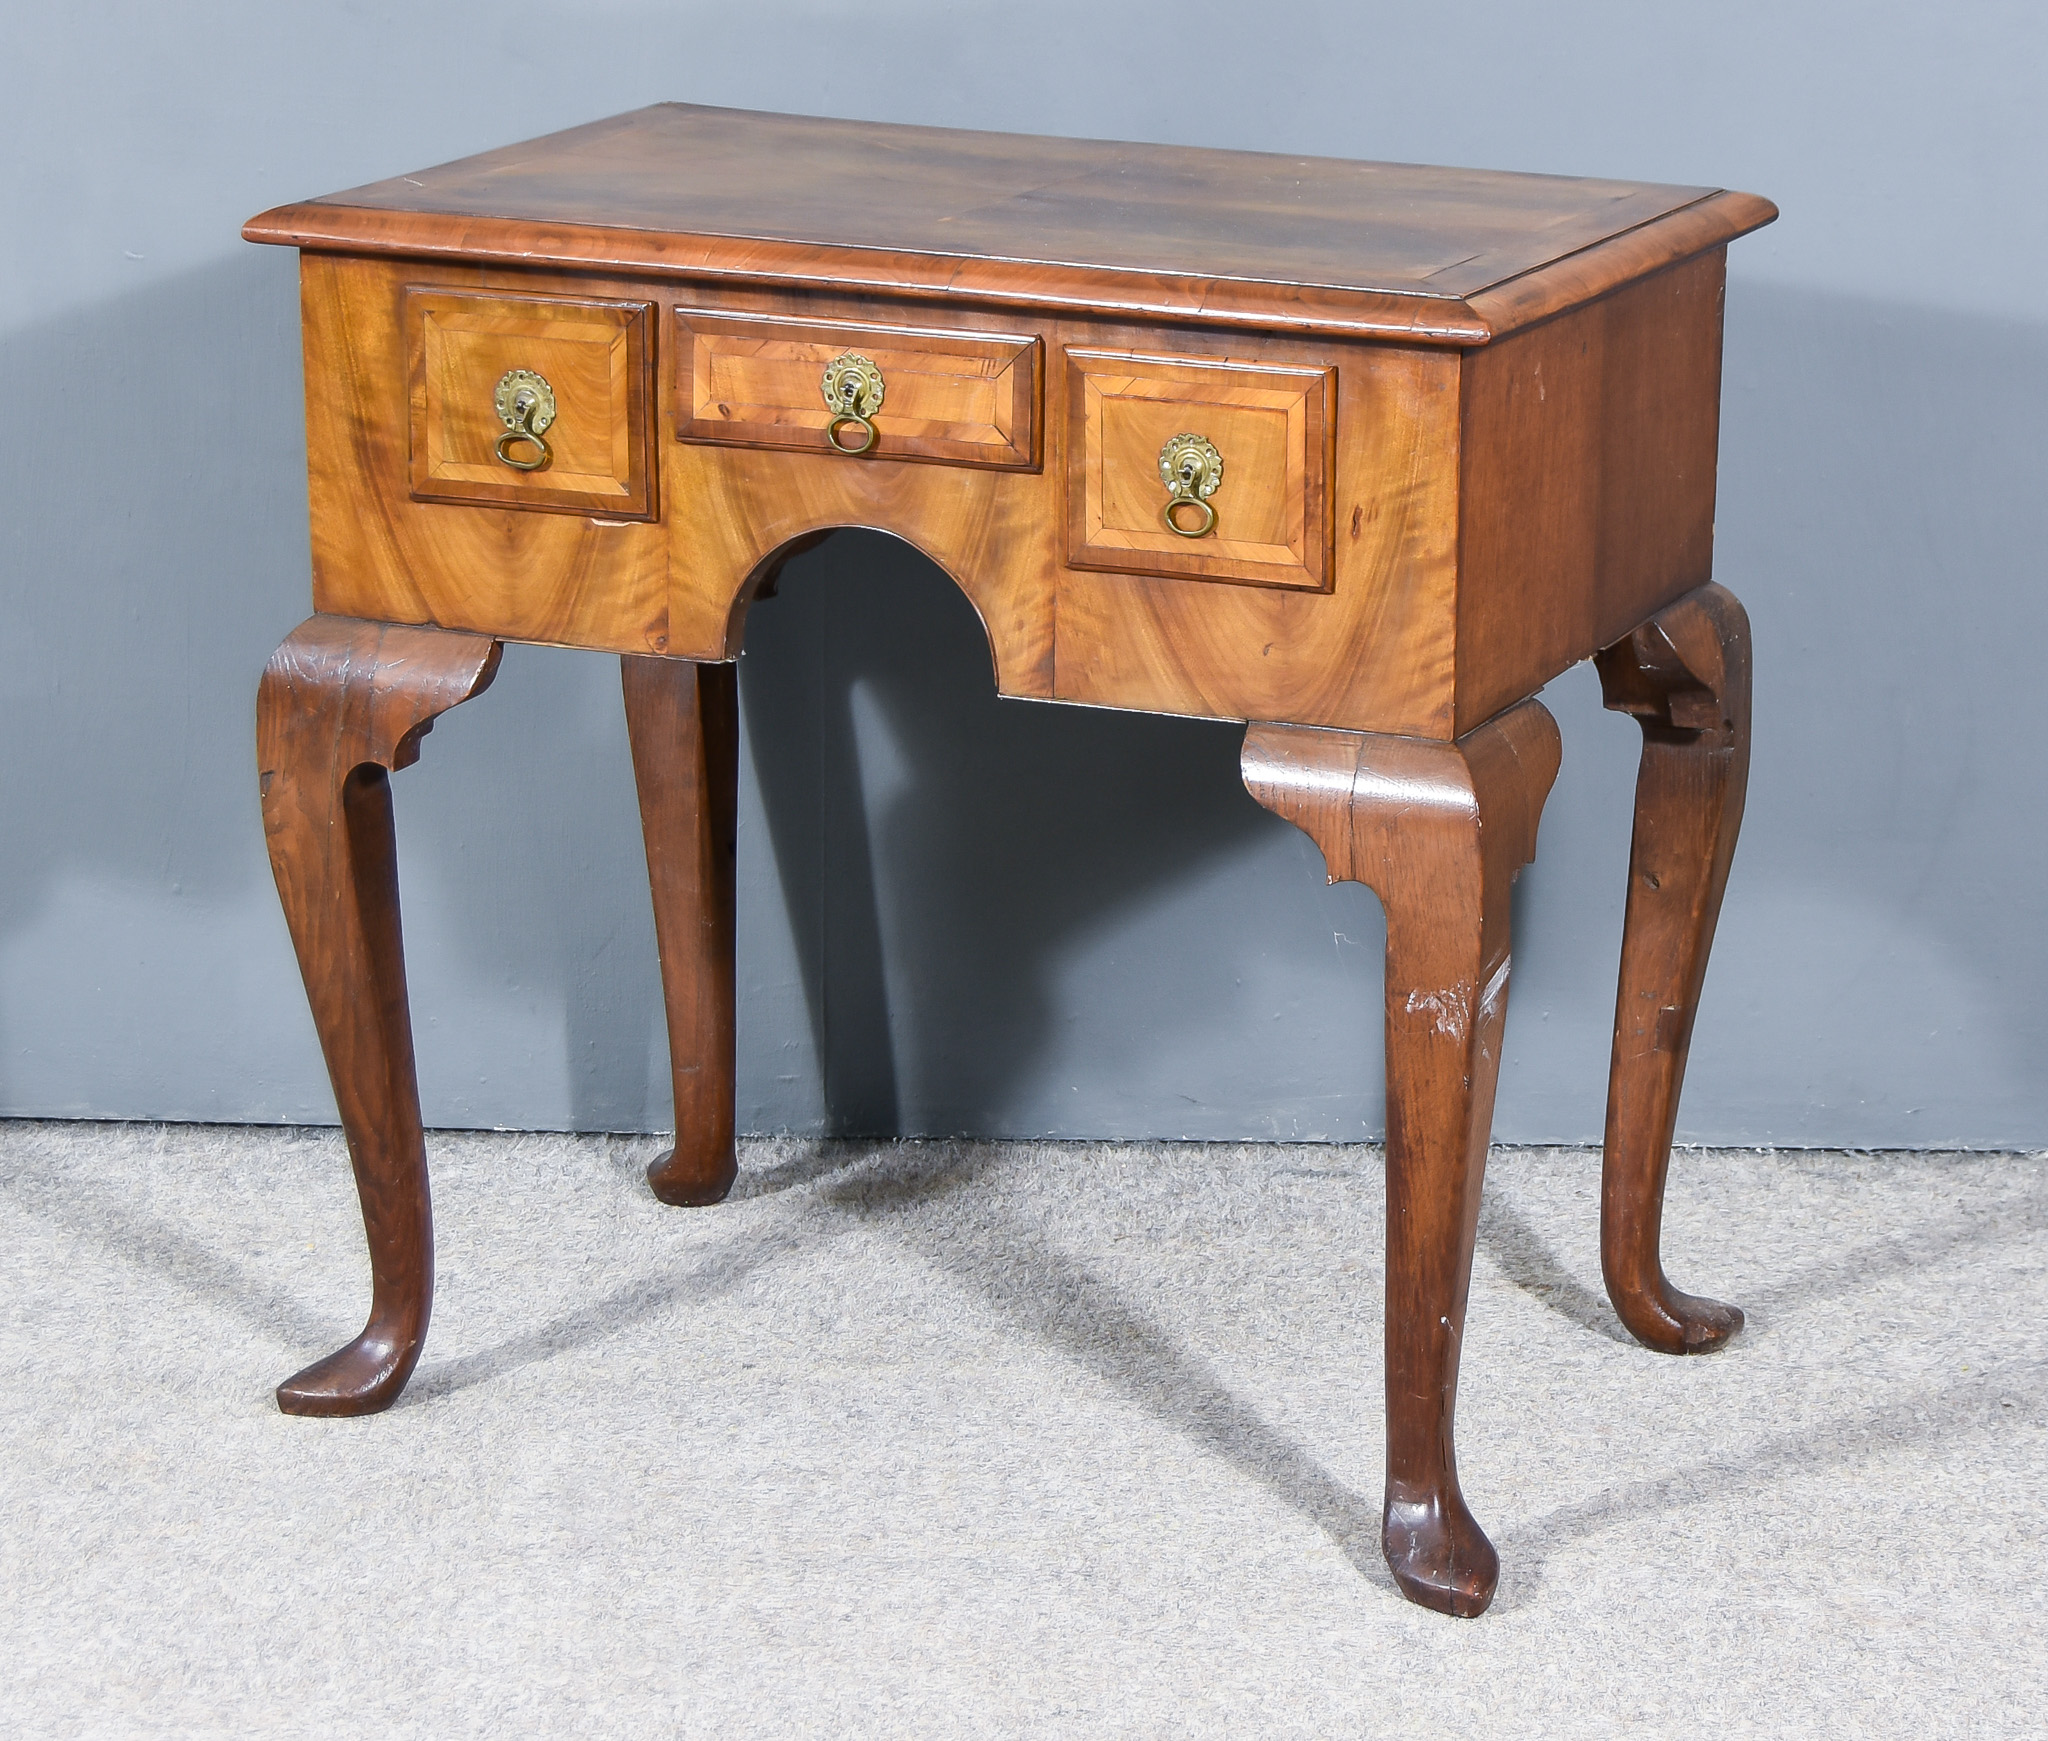 A Walnut Lowboy of Early 18th Century Design, with quarter veneer top and drawer fronts, inlaid with